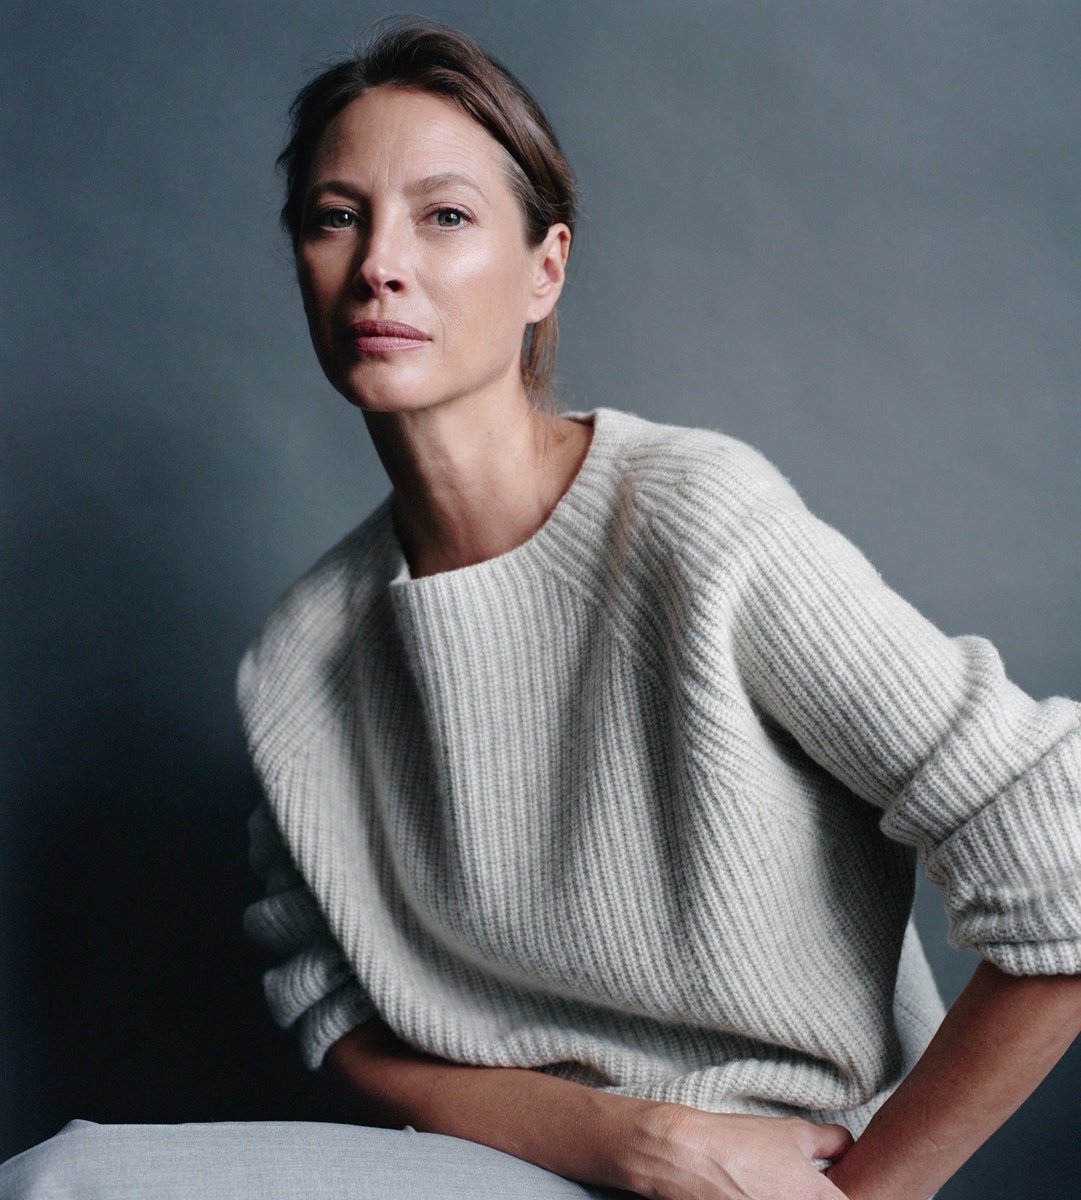 The Epstein Files:

Christy Turlington- A Model & Humanitarian. 

World renowned for her beauty, fashion. She graced the cover of Vogue magazine multiple times. 

This with a debt to the dark lord himself. What she got in return can only be paid with her soul.

File name below.